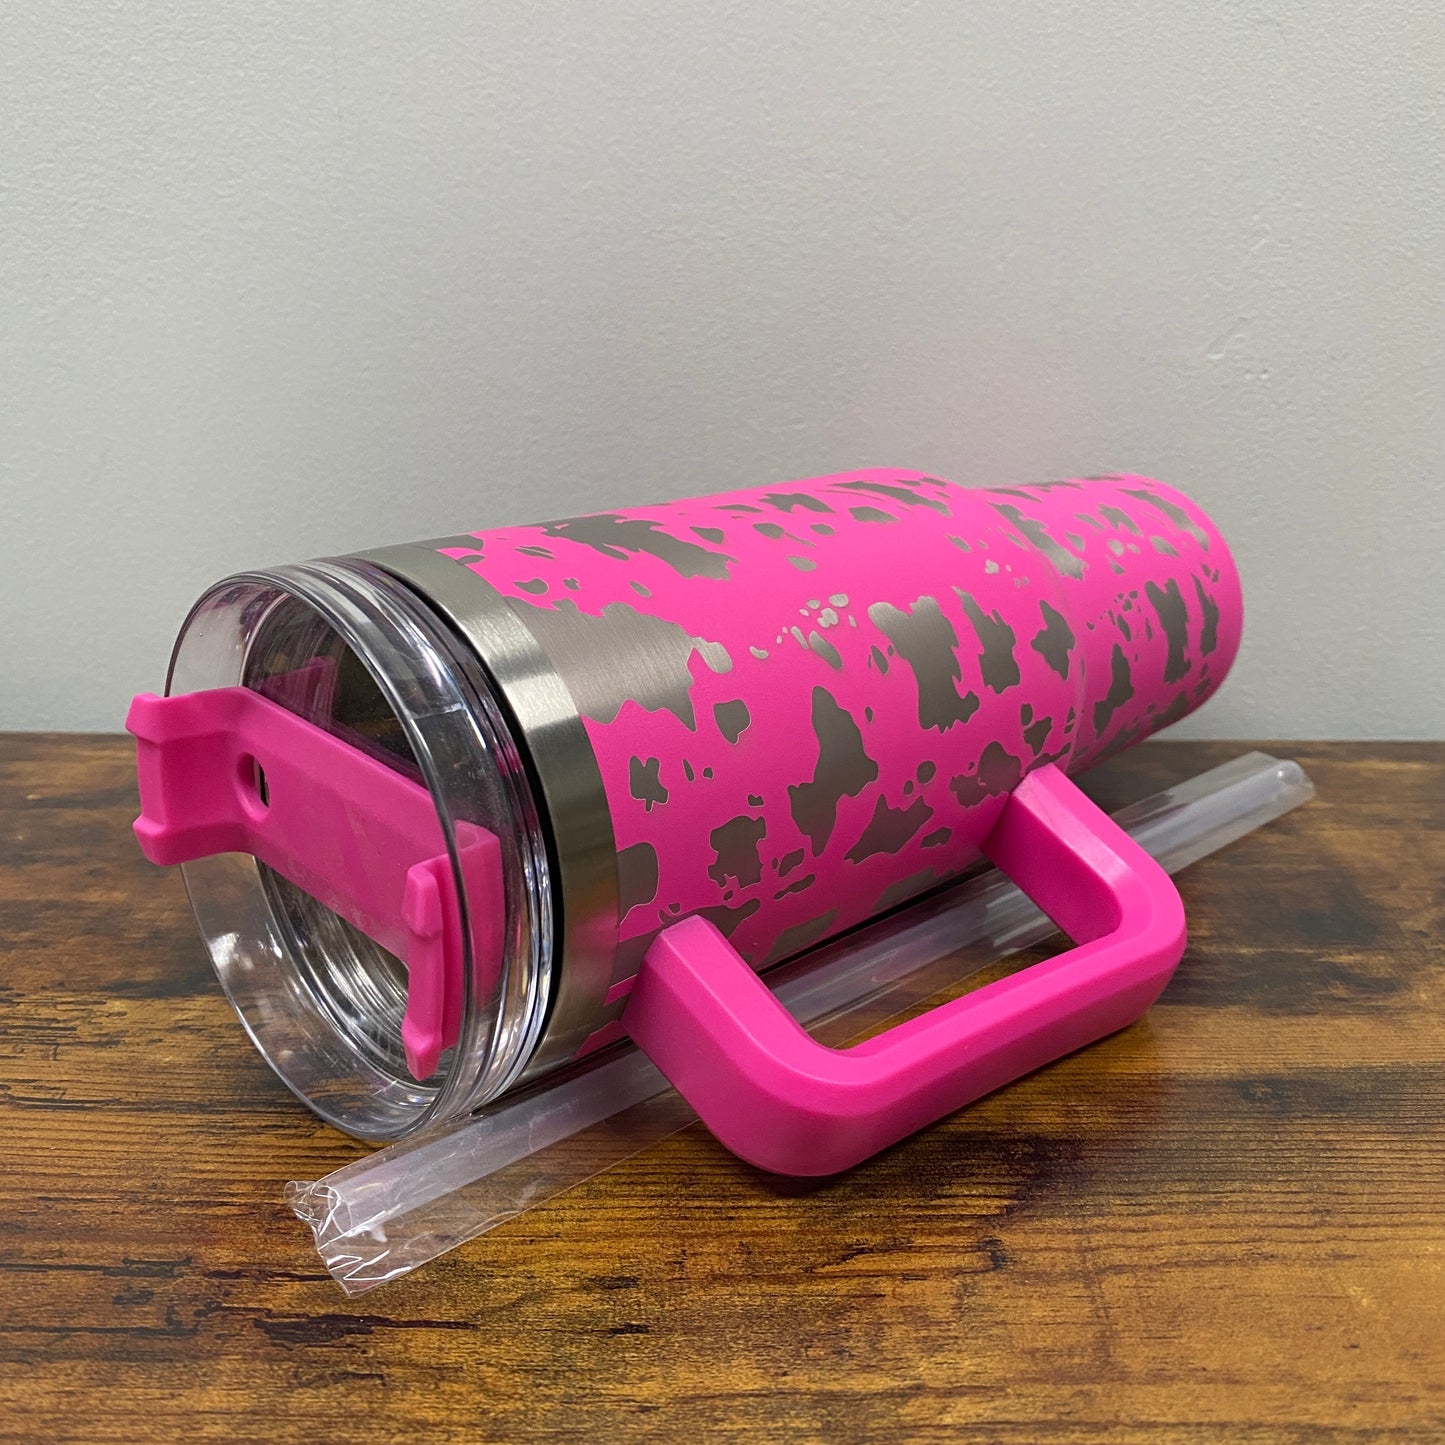 Tumbler 40oz - Etched Cow - Hot Pink